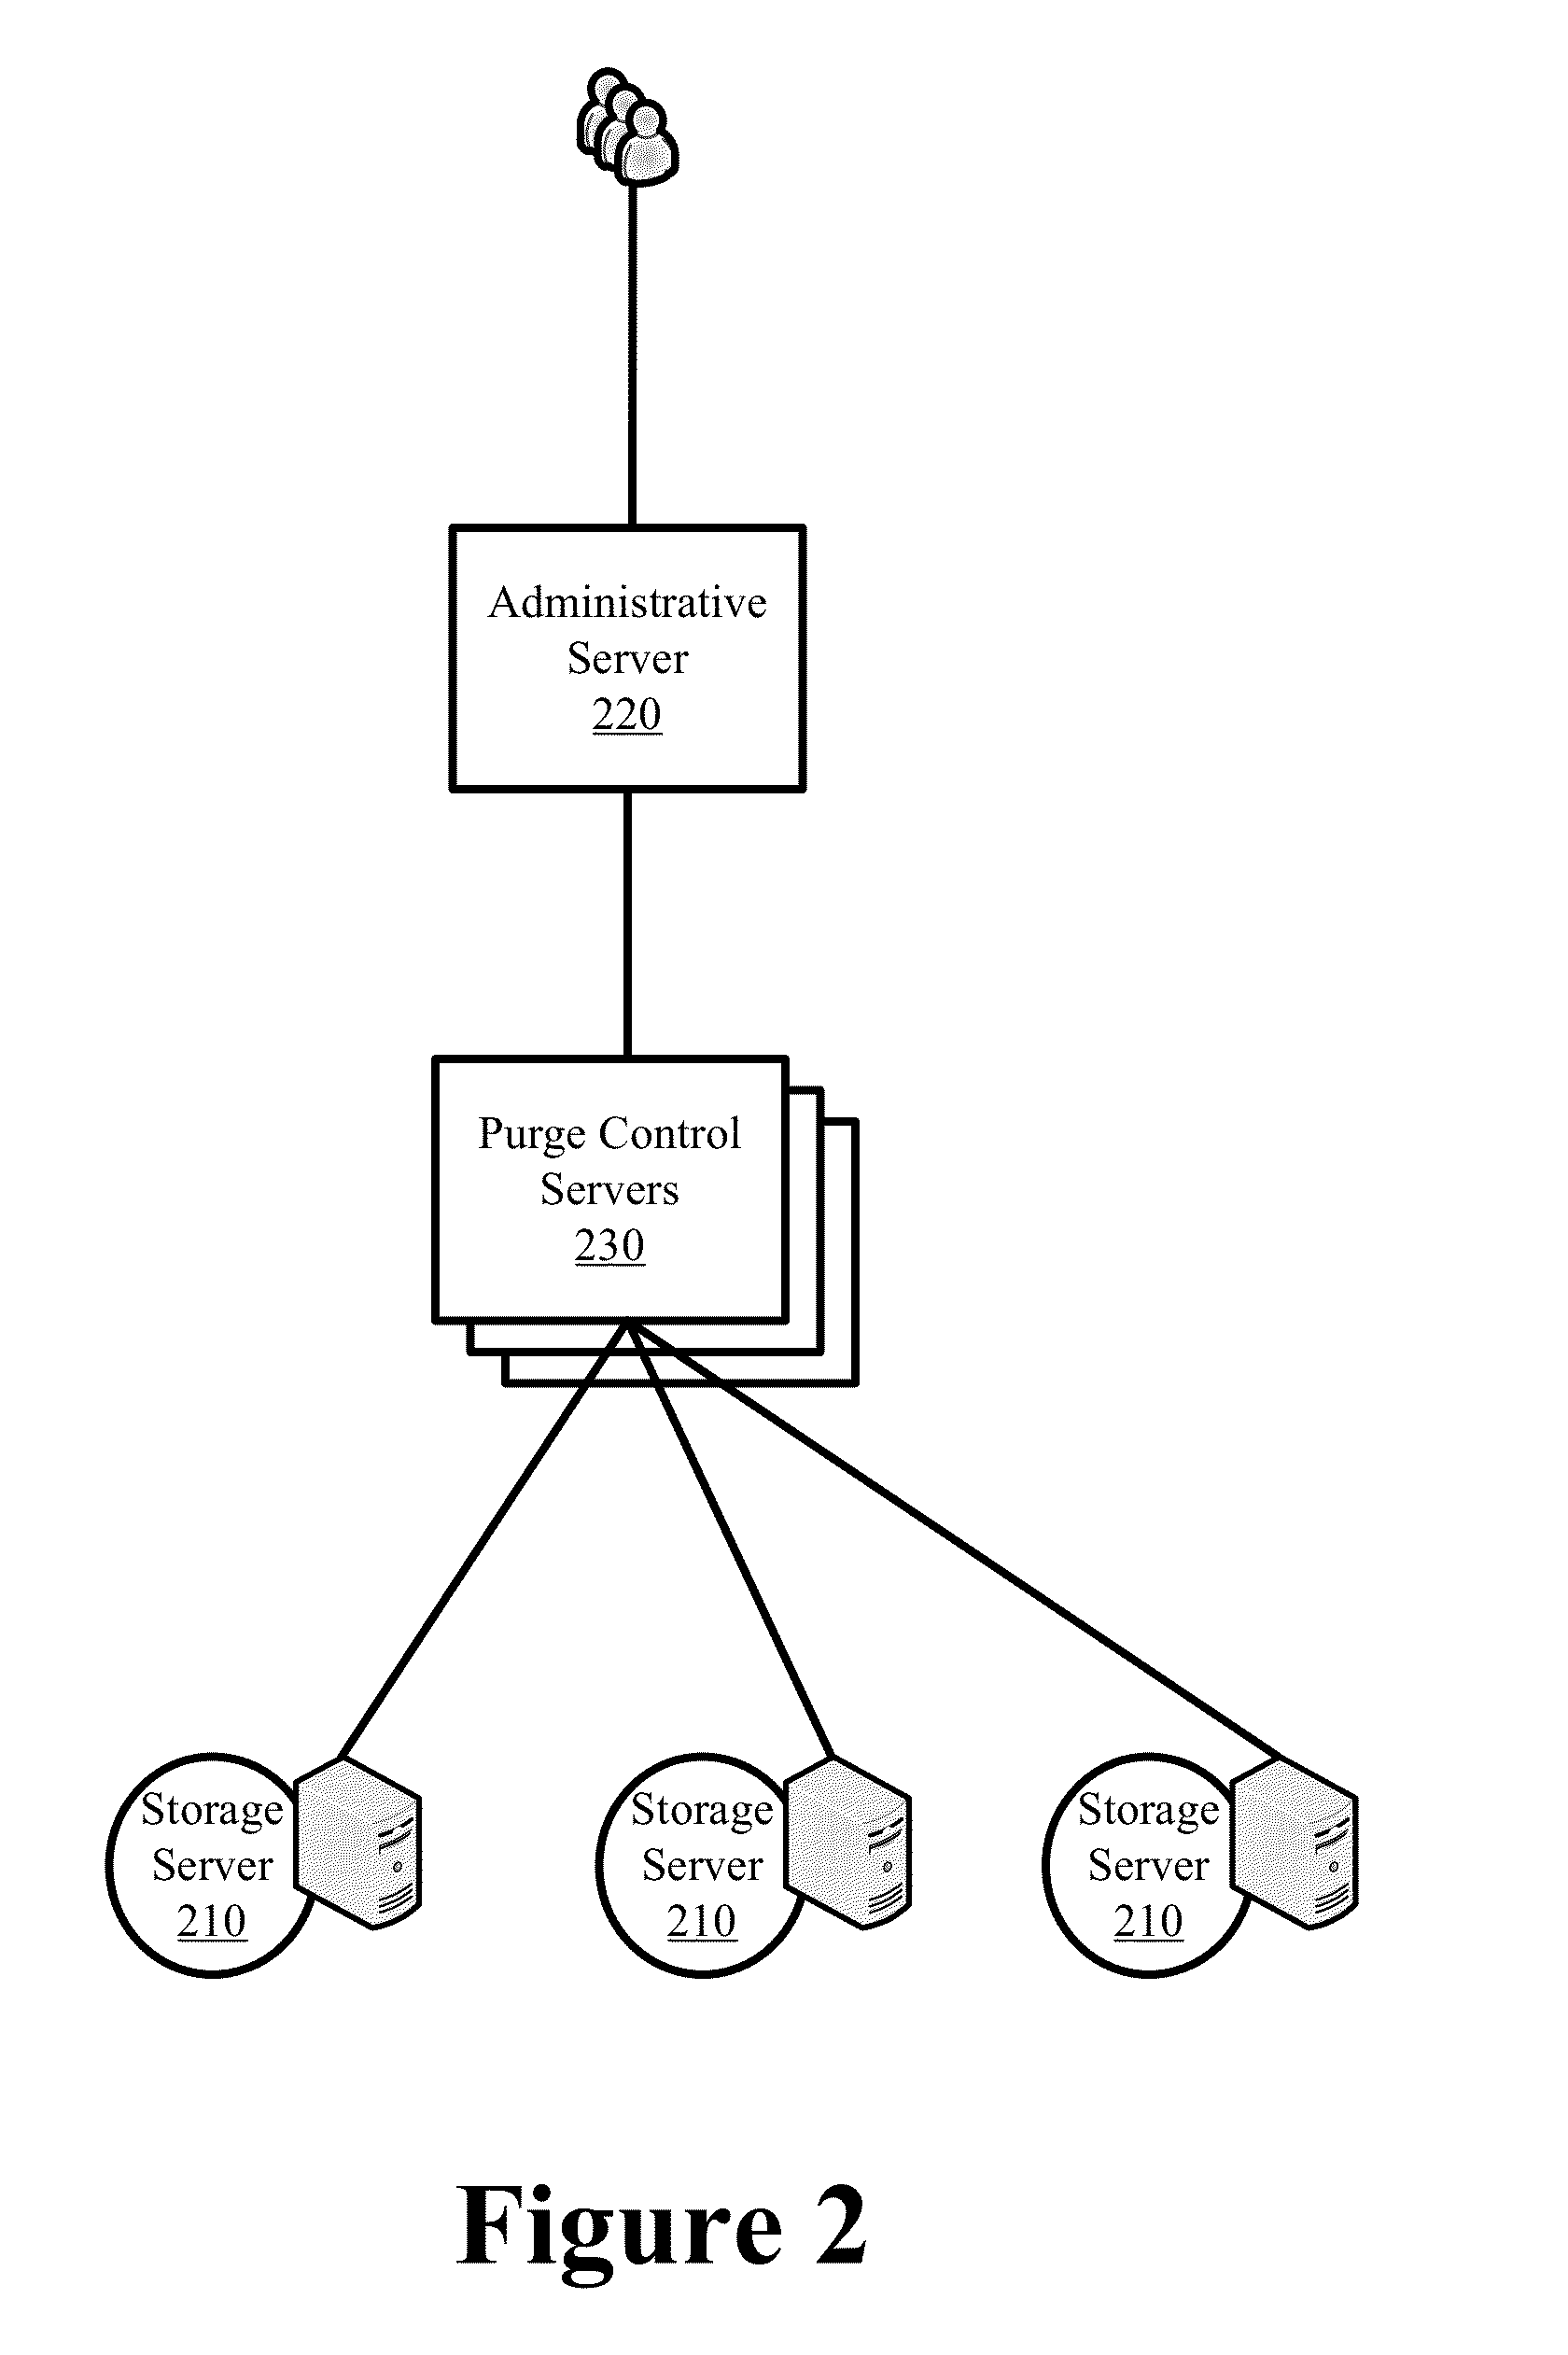 Instantaneous non-blocking content purging in a distributed platform